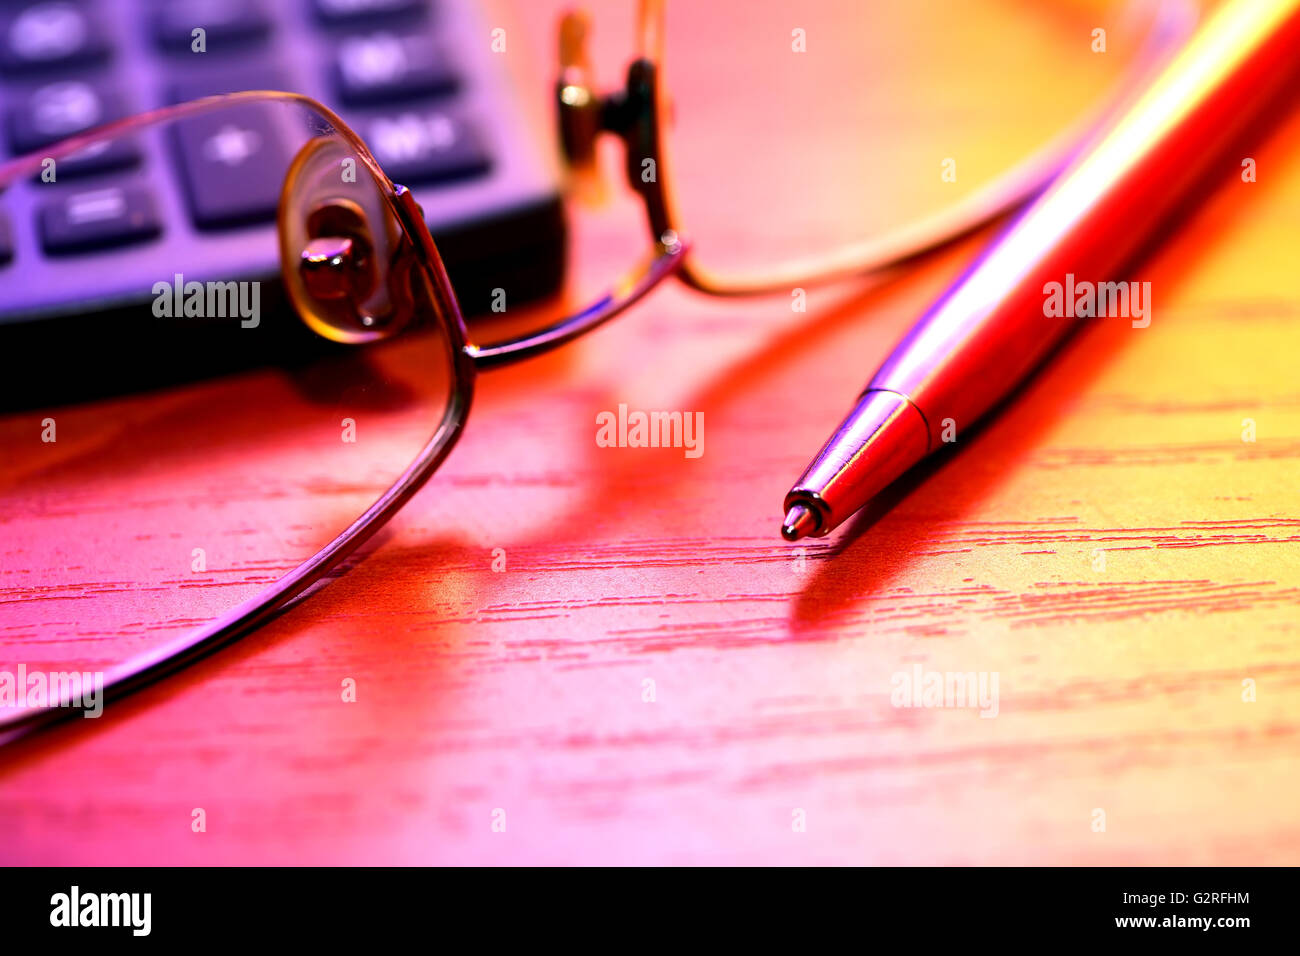 Colorful still life with pen near spectacles and calculator Stock Photo